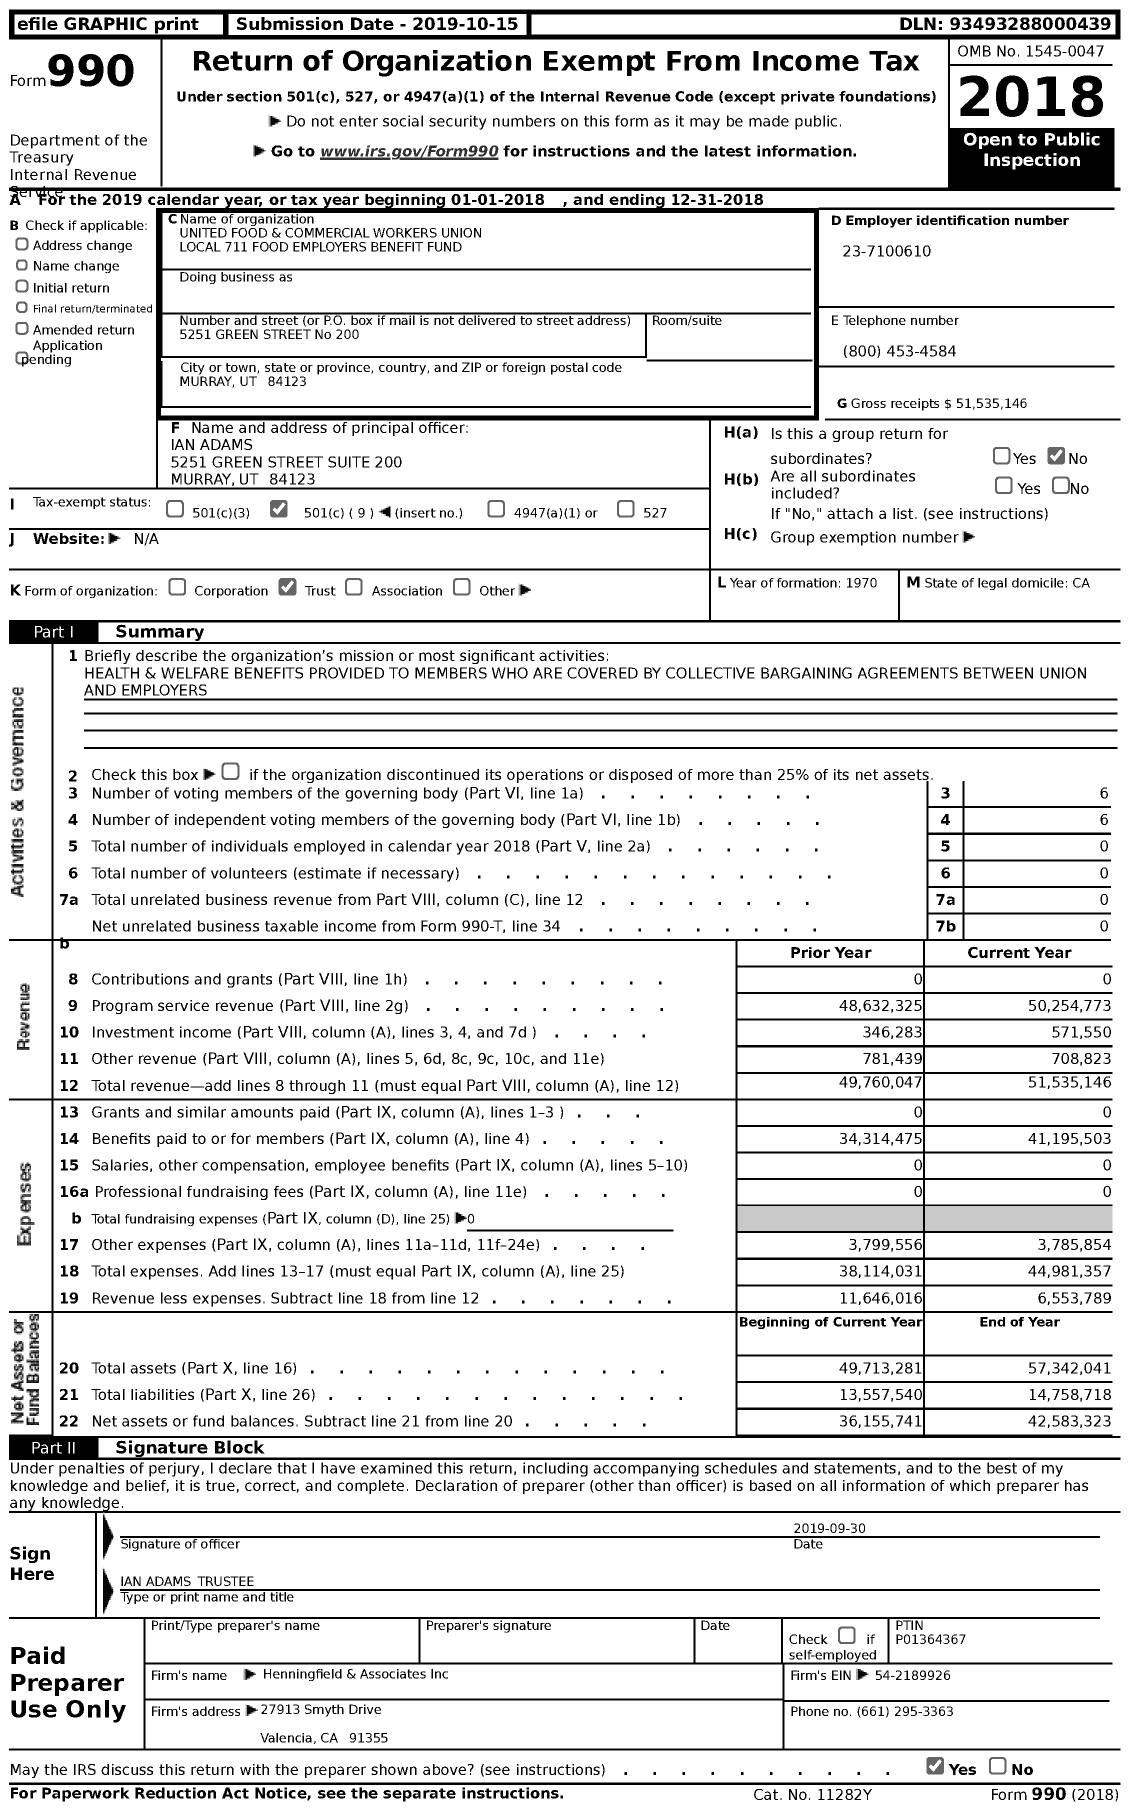 Image of first page of 2018 Form 990 for United Food and Commercial Workers Union Local 711 Food Employers Benefit Fund